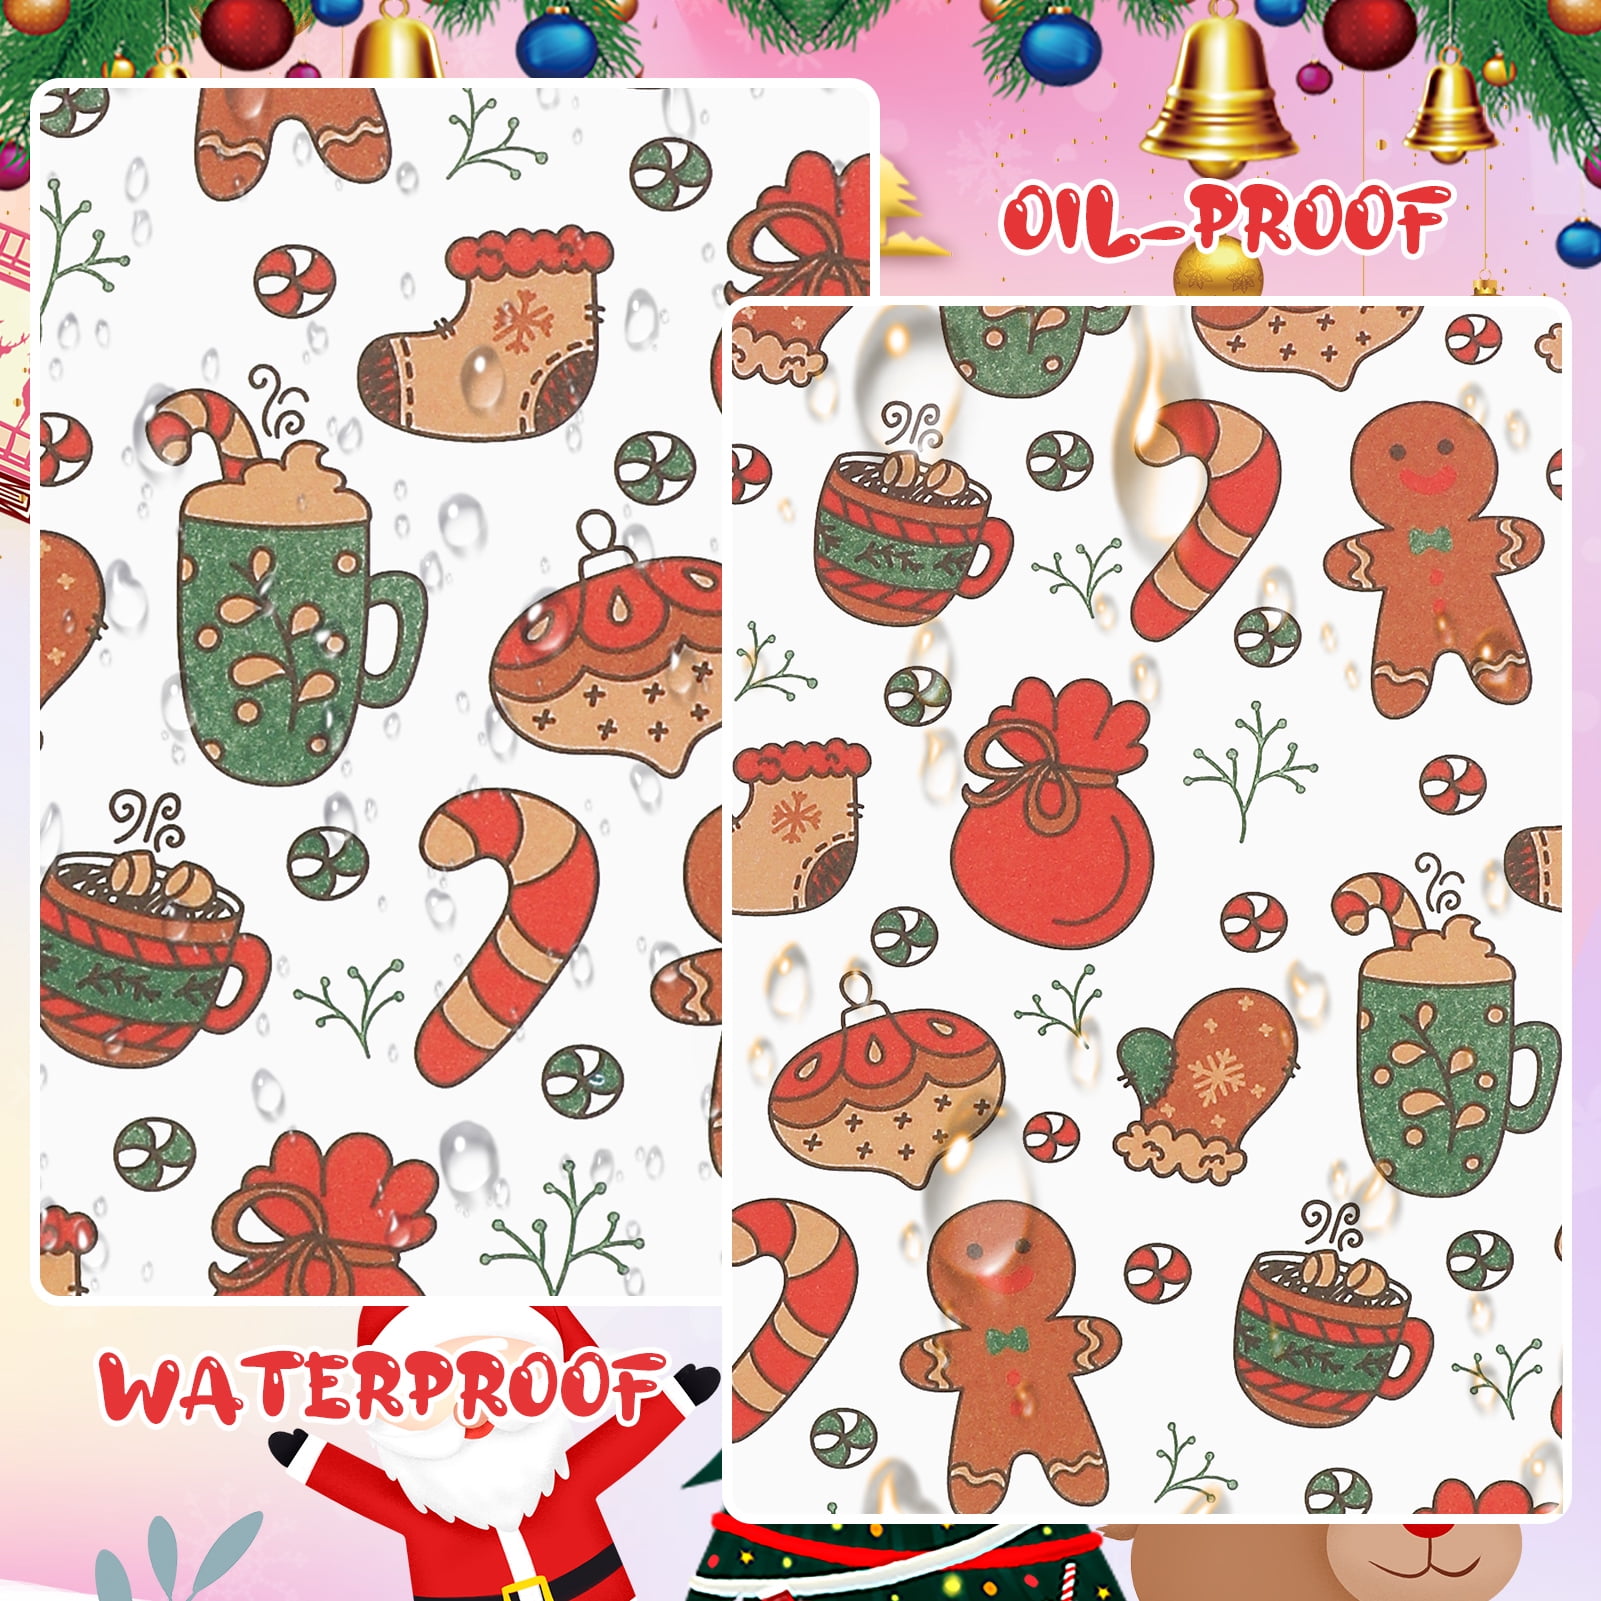  160 Pcs Christmas Wax Paper Sheets for Food Snowflake Hoho Wax  Paper Wrapping Bulk Deli Parchment Baking Paper Sandwich Candy Cookies  Waterproof Wrappers Oilproof Basket Liners (7.87 x 9.84 Inch) : Everything  Else